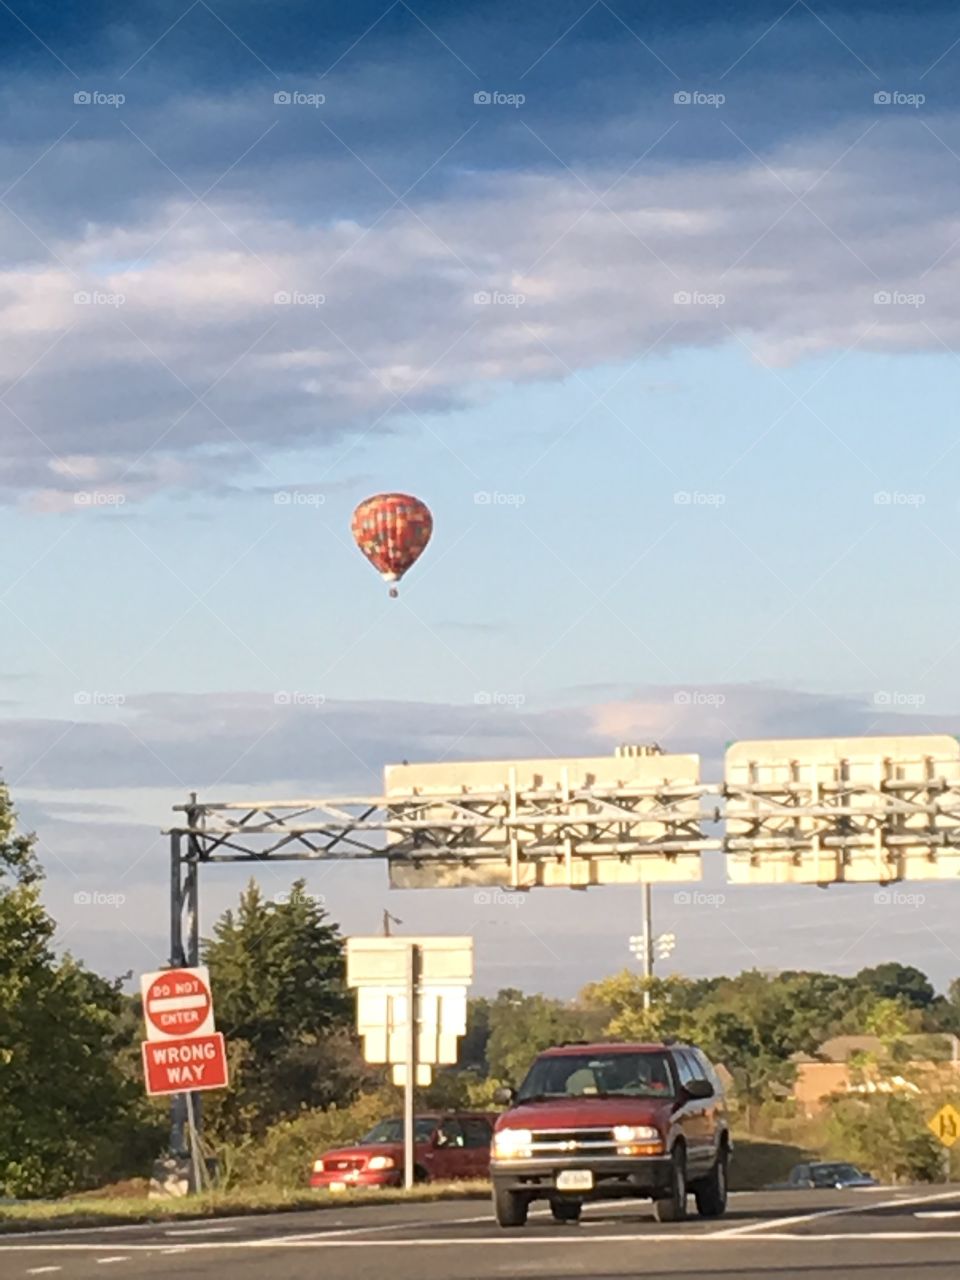 Riding home from work, in the middle of a big intersection, floated a beautiful hot air balloon.